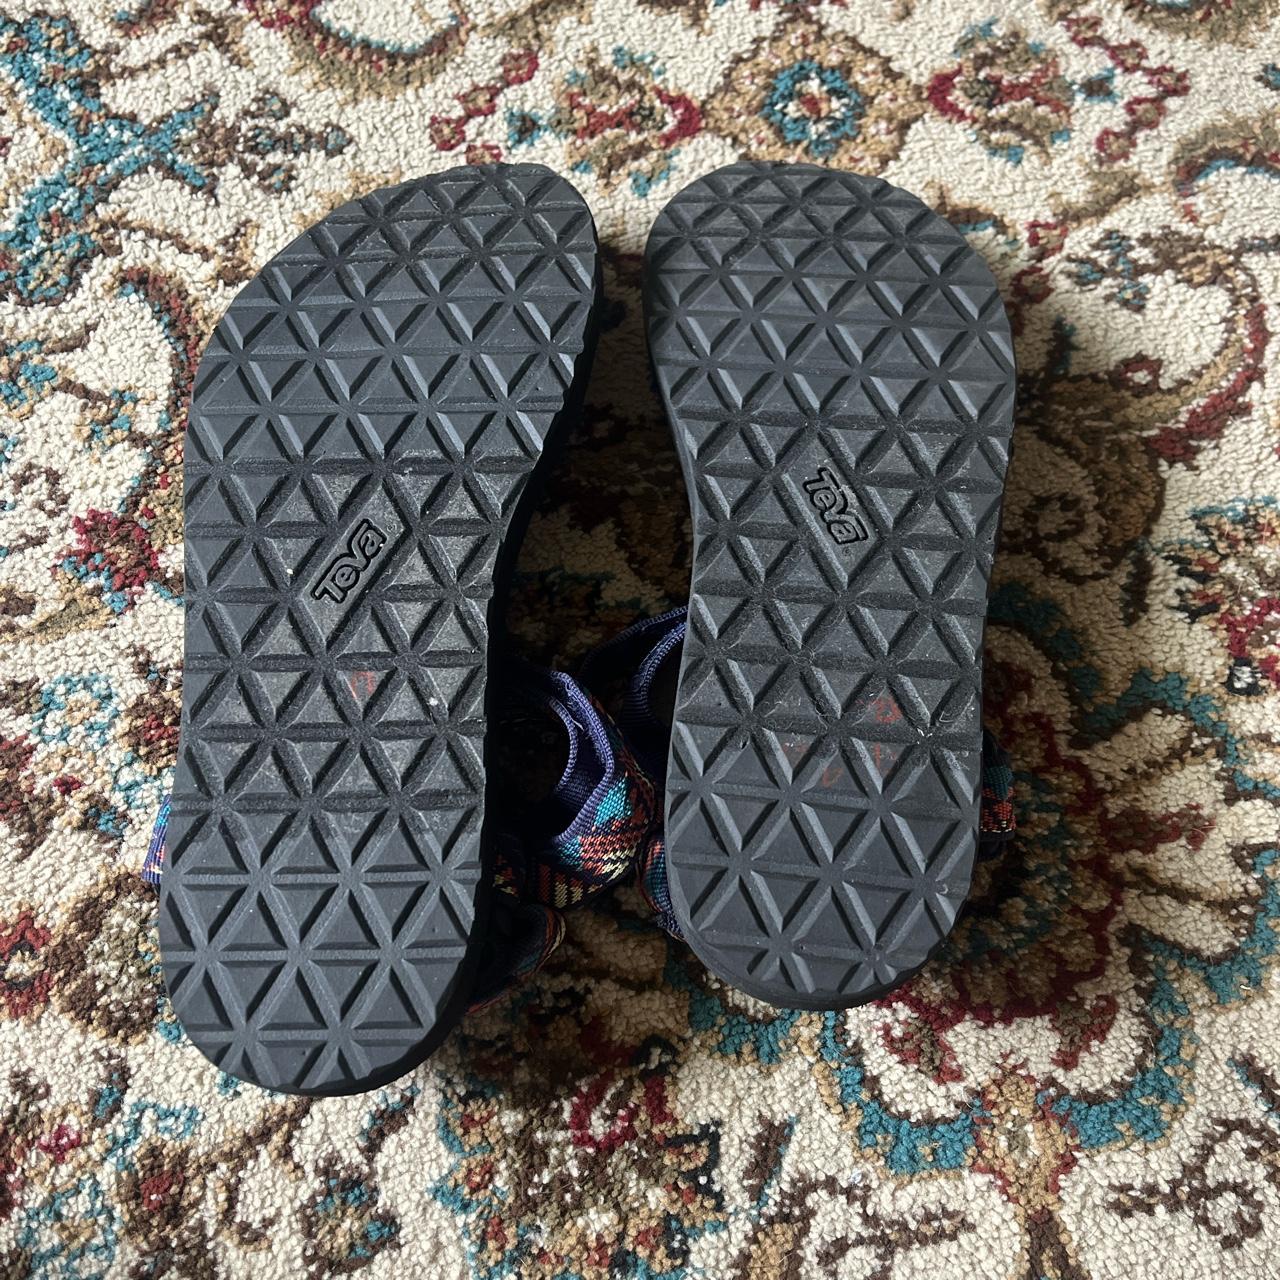 teva size 10 sandals. really comfy and perfect for... - Depop